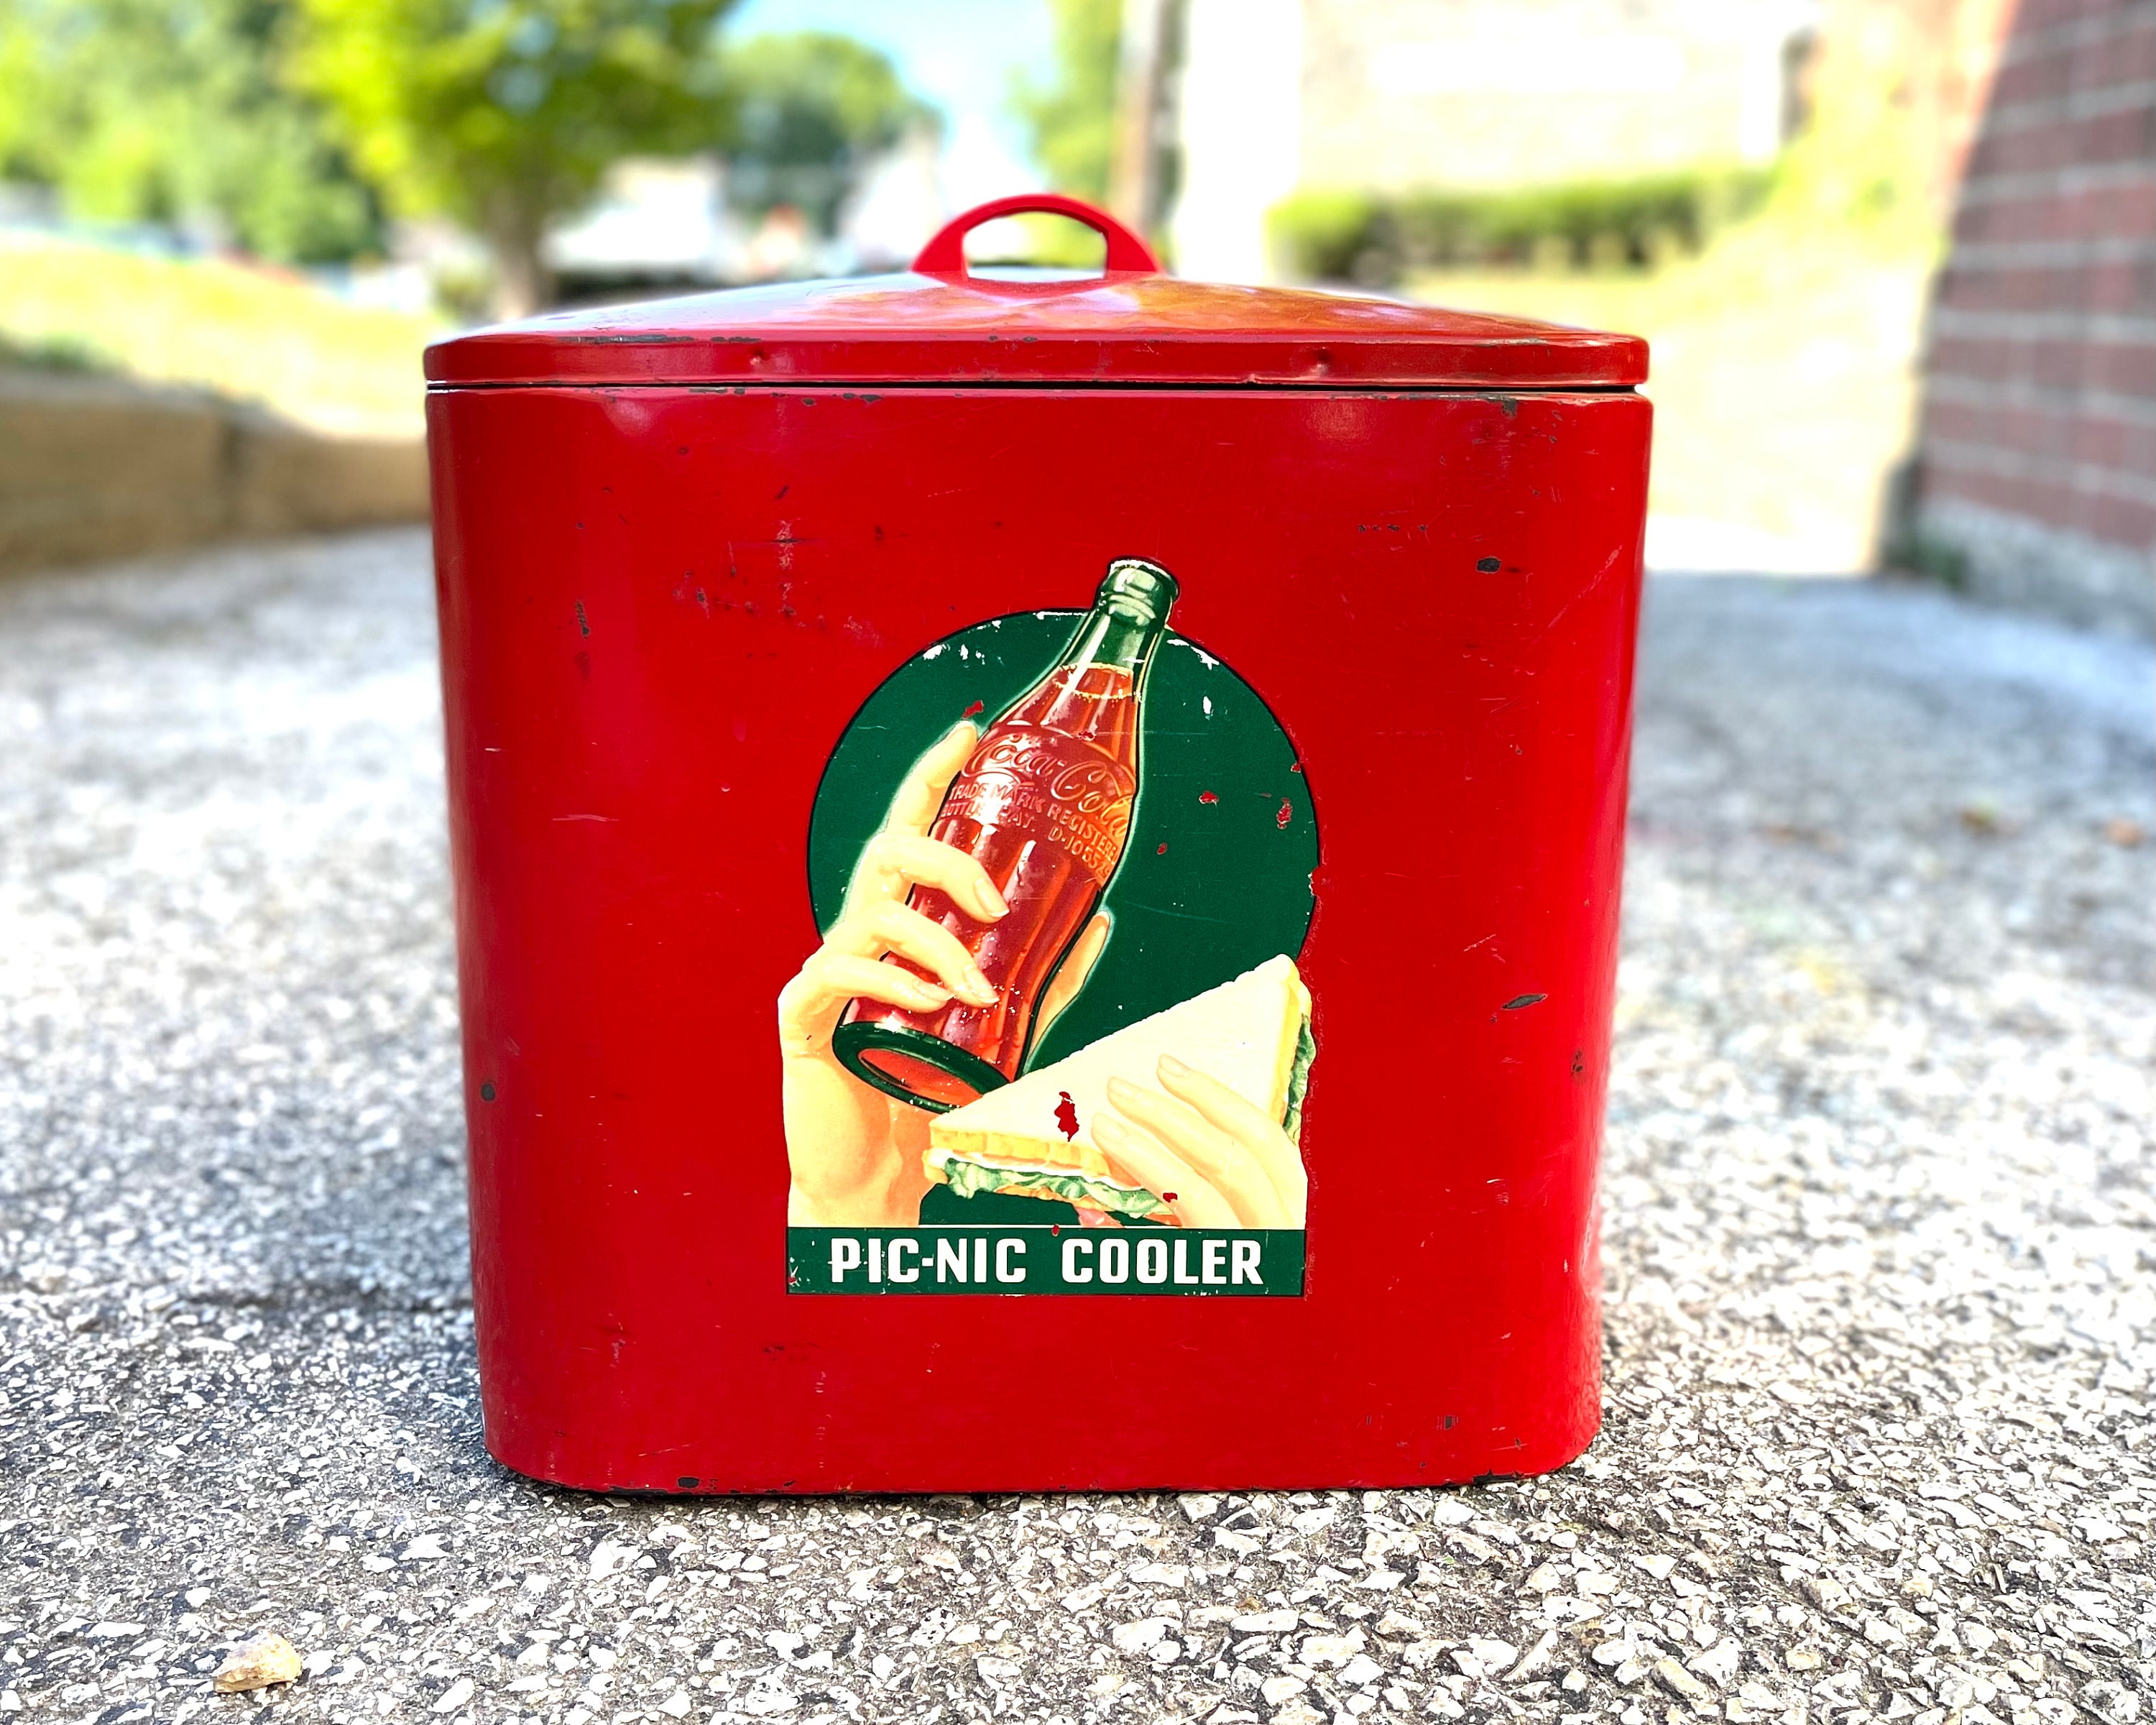 Coca-Cola Can Cooler, Red